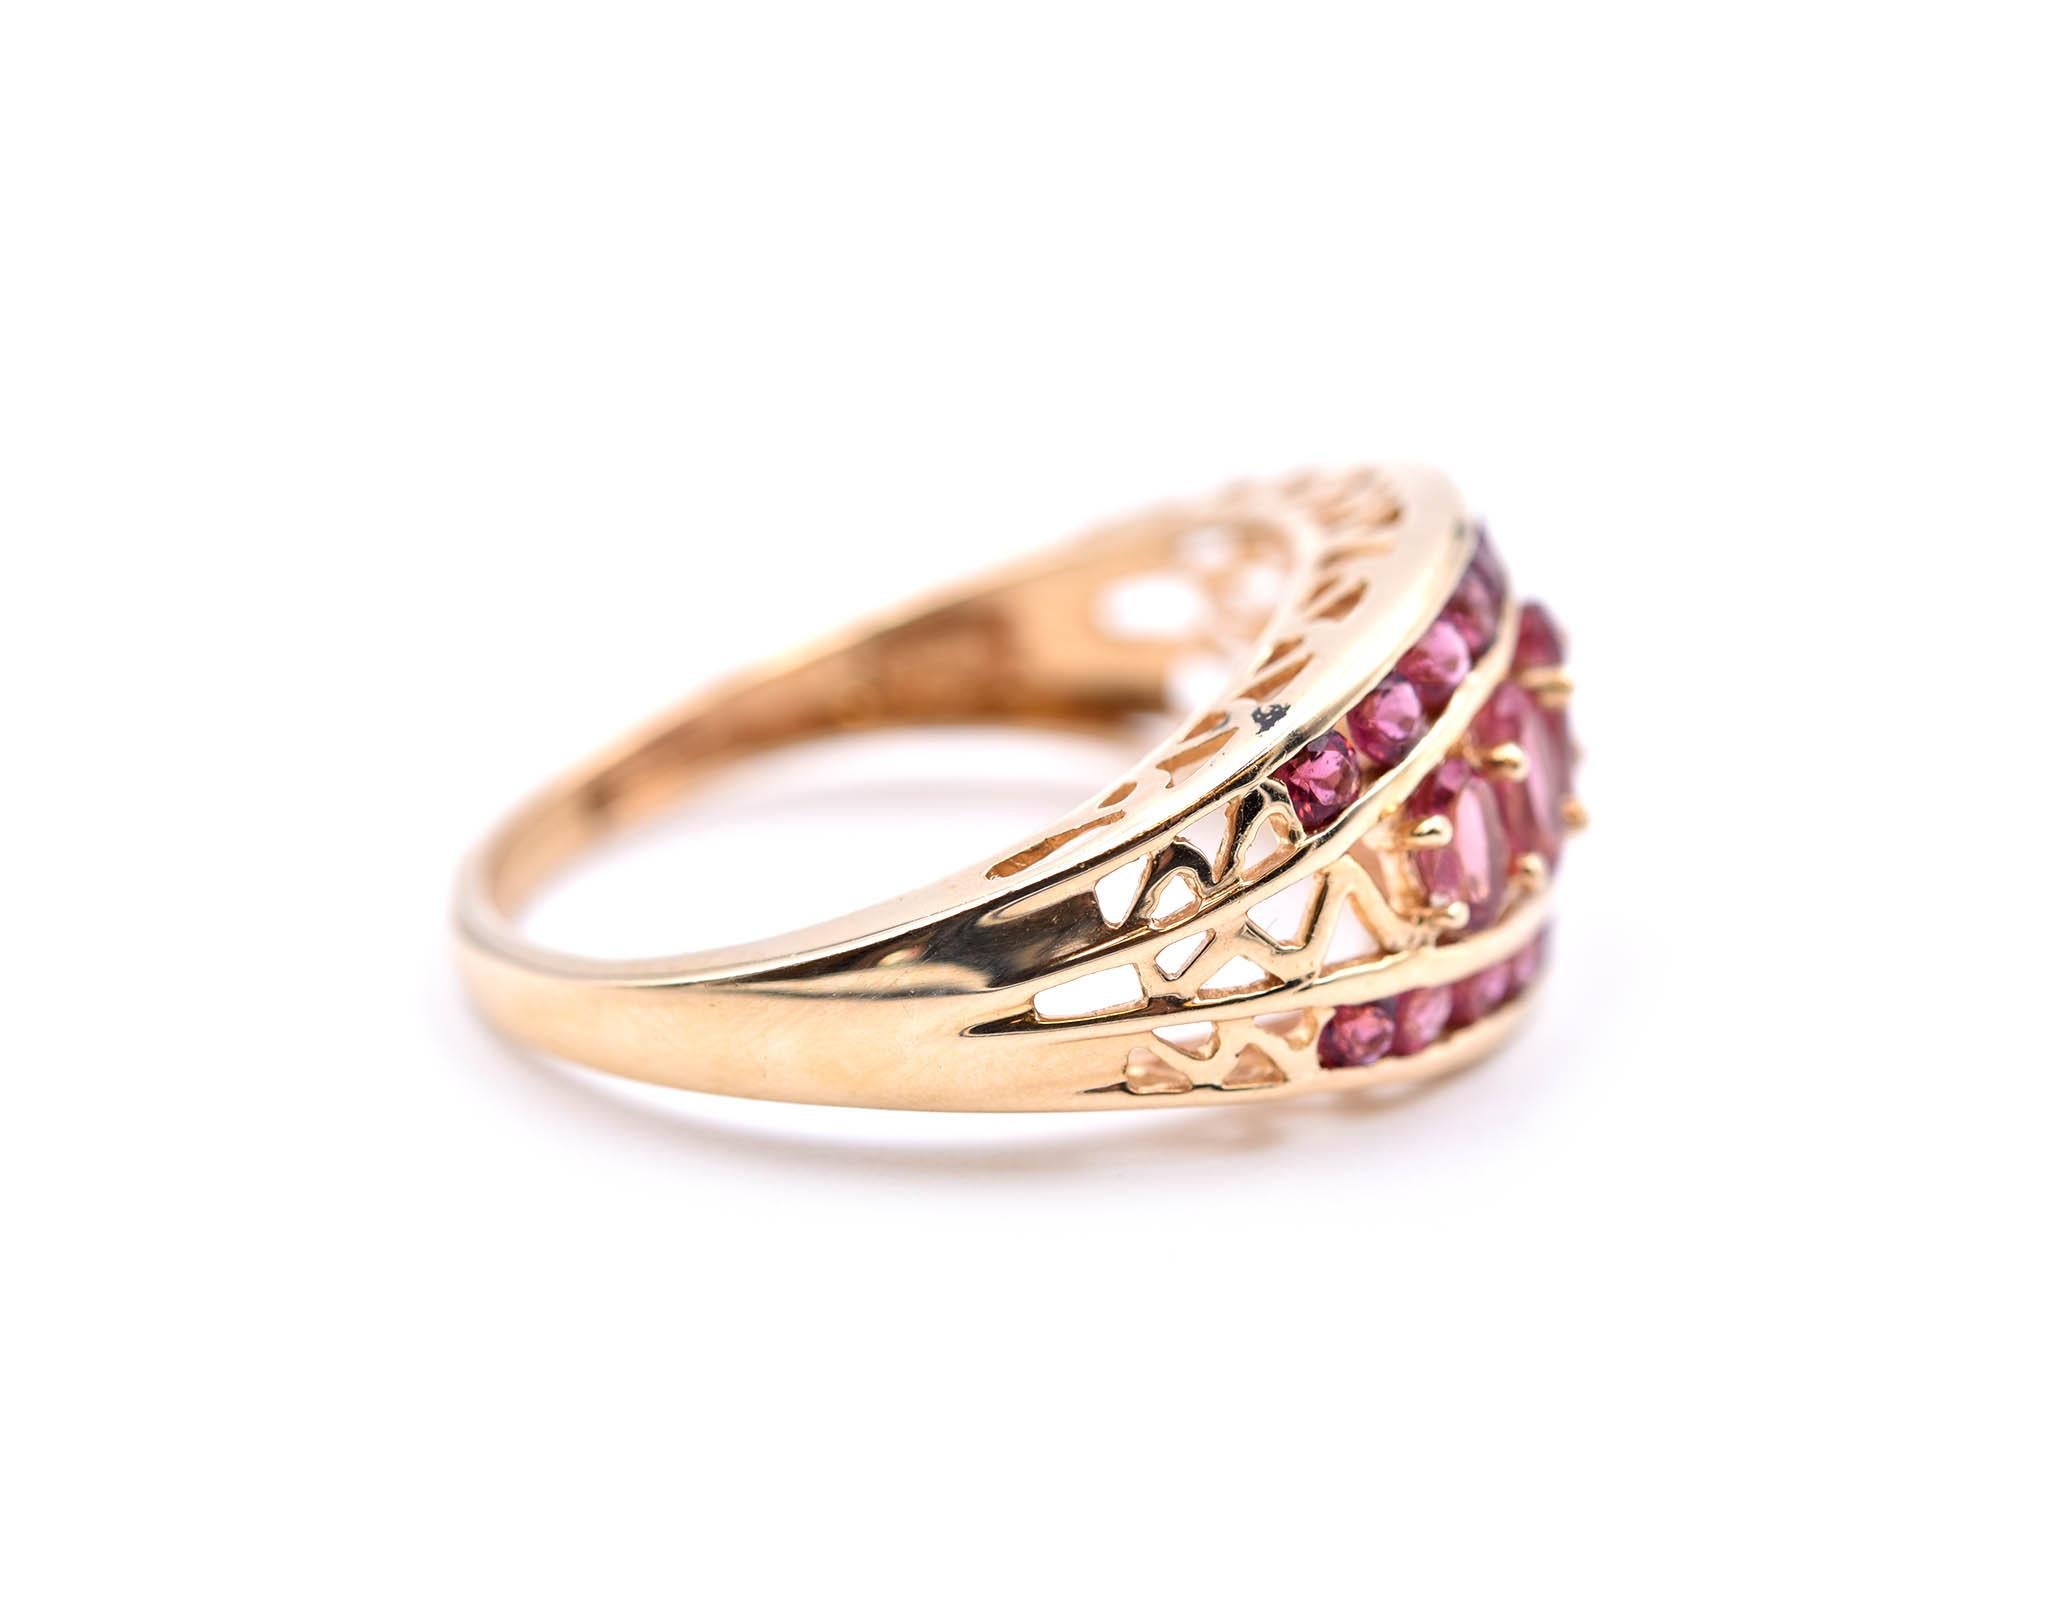 Designer: custom design
Material: 14k yellow gold 
Pink Tourmaline: 1.70
Ring Size: 9 3/4 (please allow two additional shipping days for sizing requests) 
Weight: 14.34 grams
